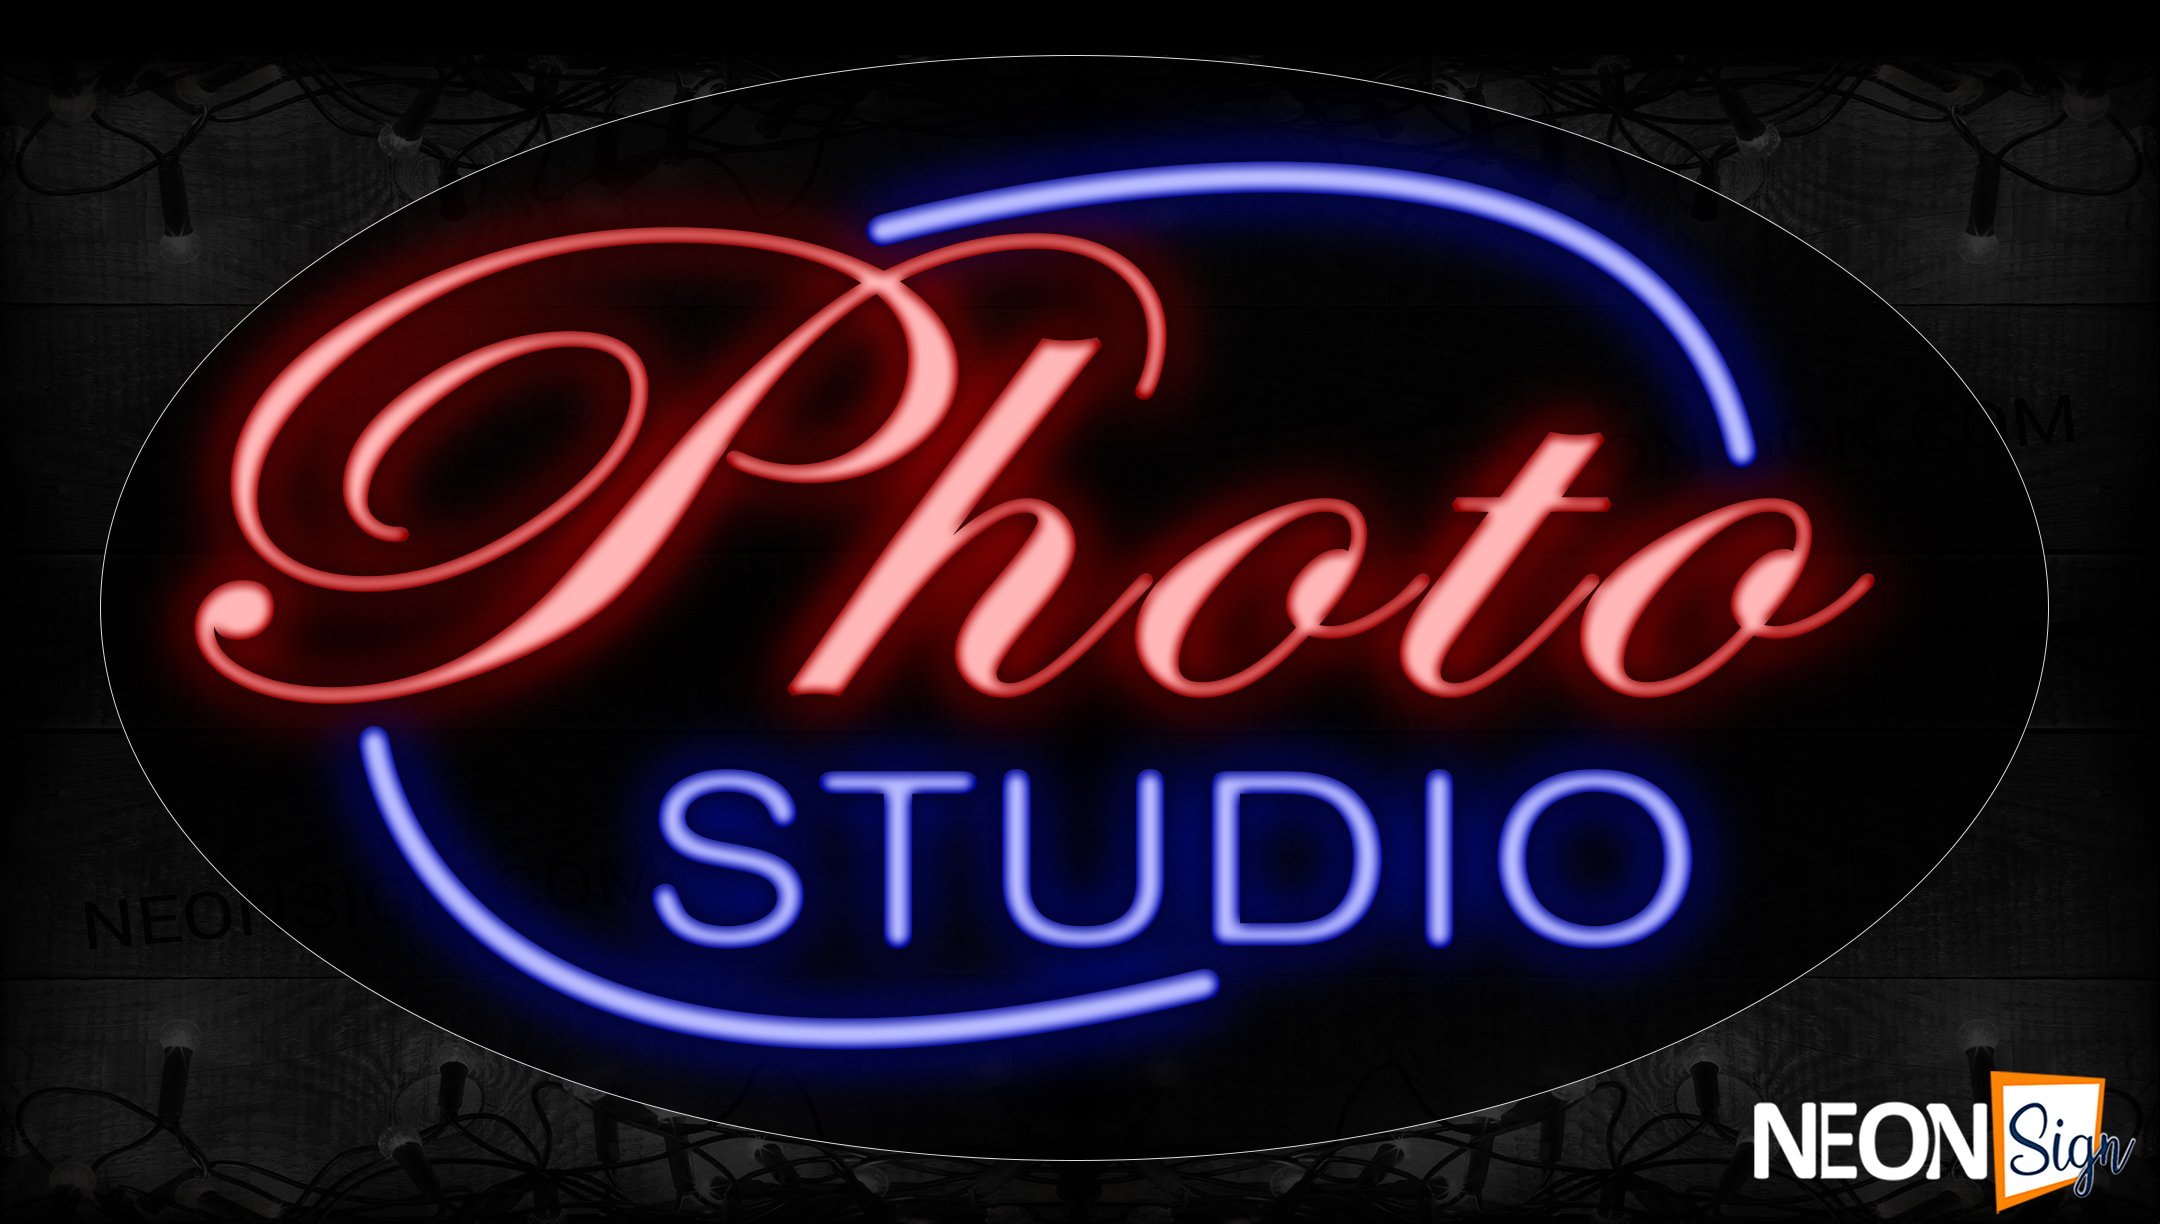 Image of 14067 Photo Studio With Circle Border Neon Signs_17x30 Contoured Black Backing